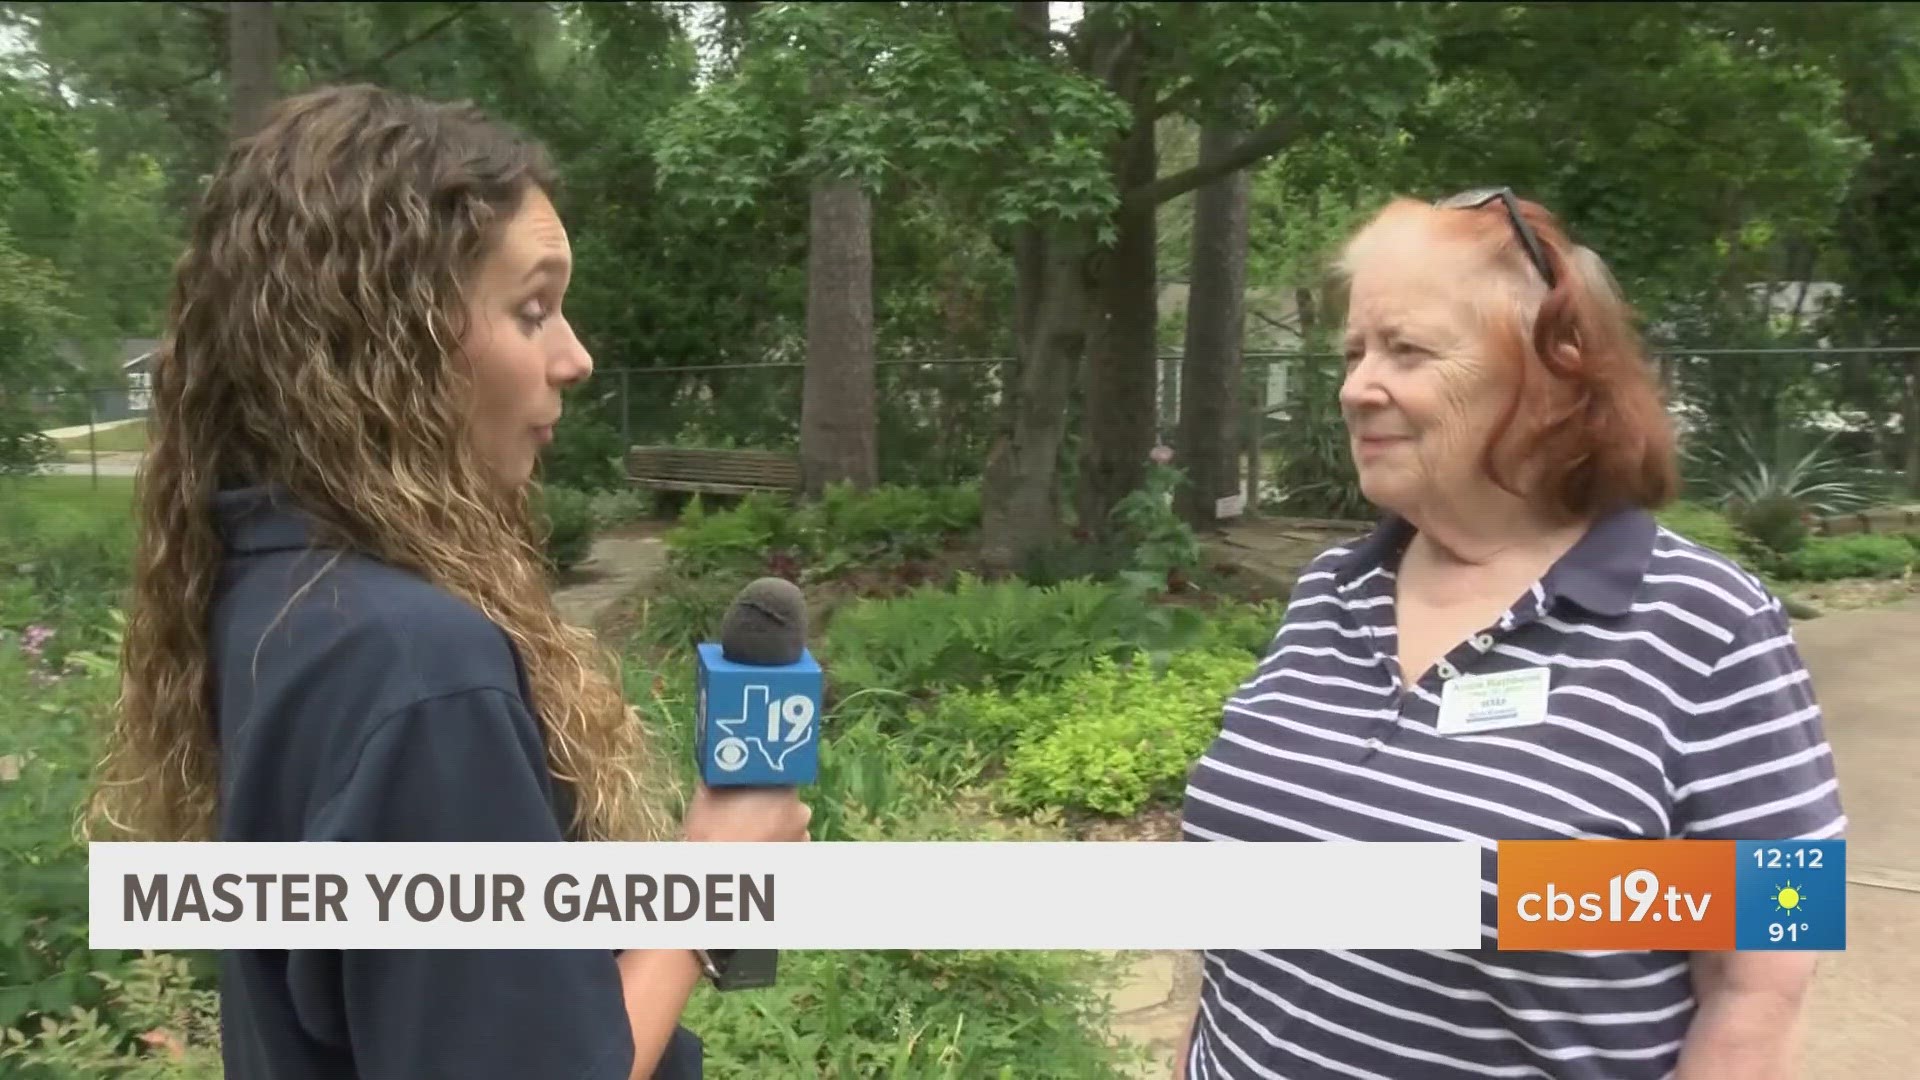 The Smith County Master Gardeners tell us about deer-resistant plants